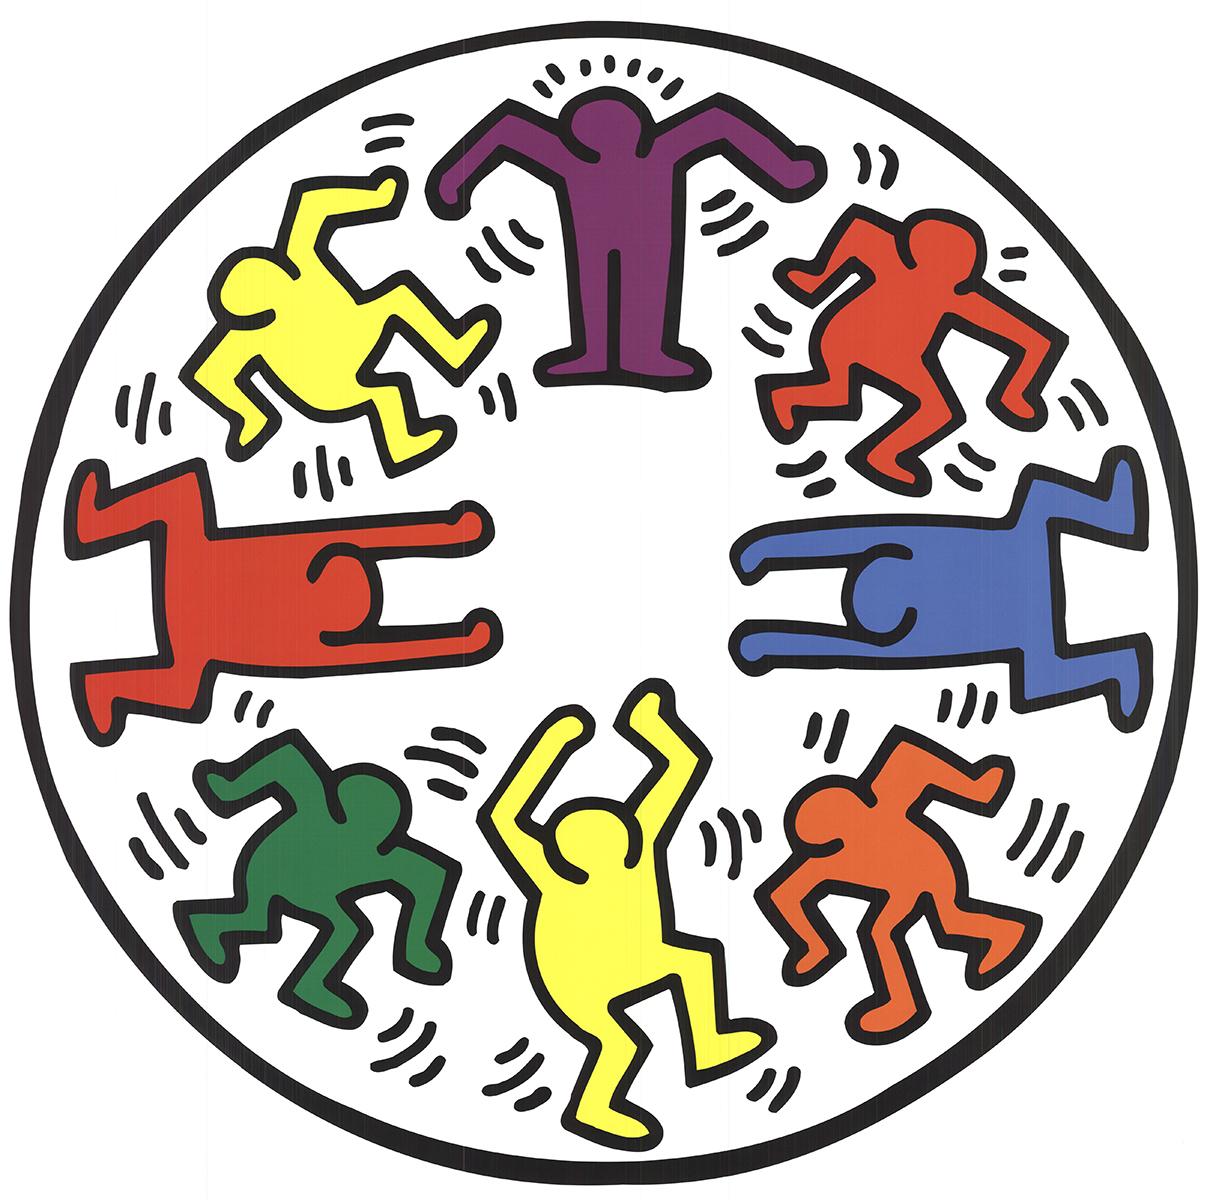 Keith Haring 'Ohne Titel, 1986' 2007- Offsetlithographie im Angebot 3